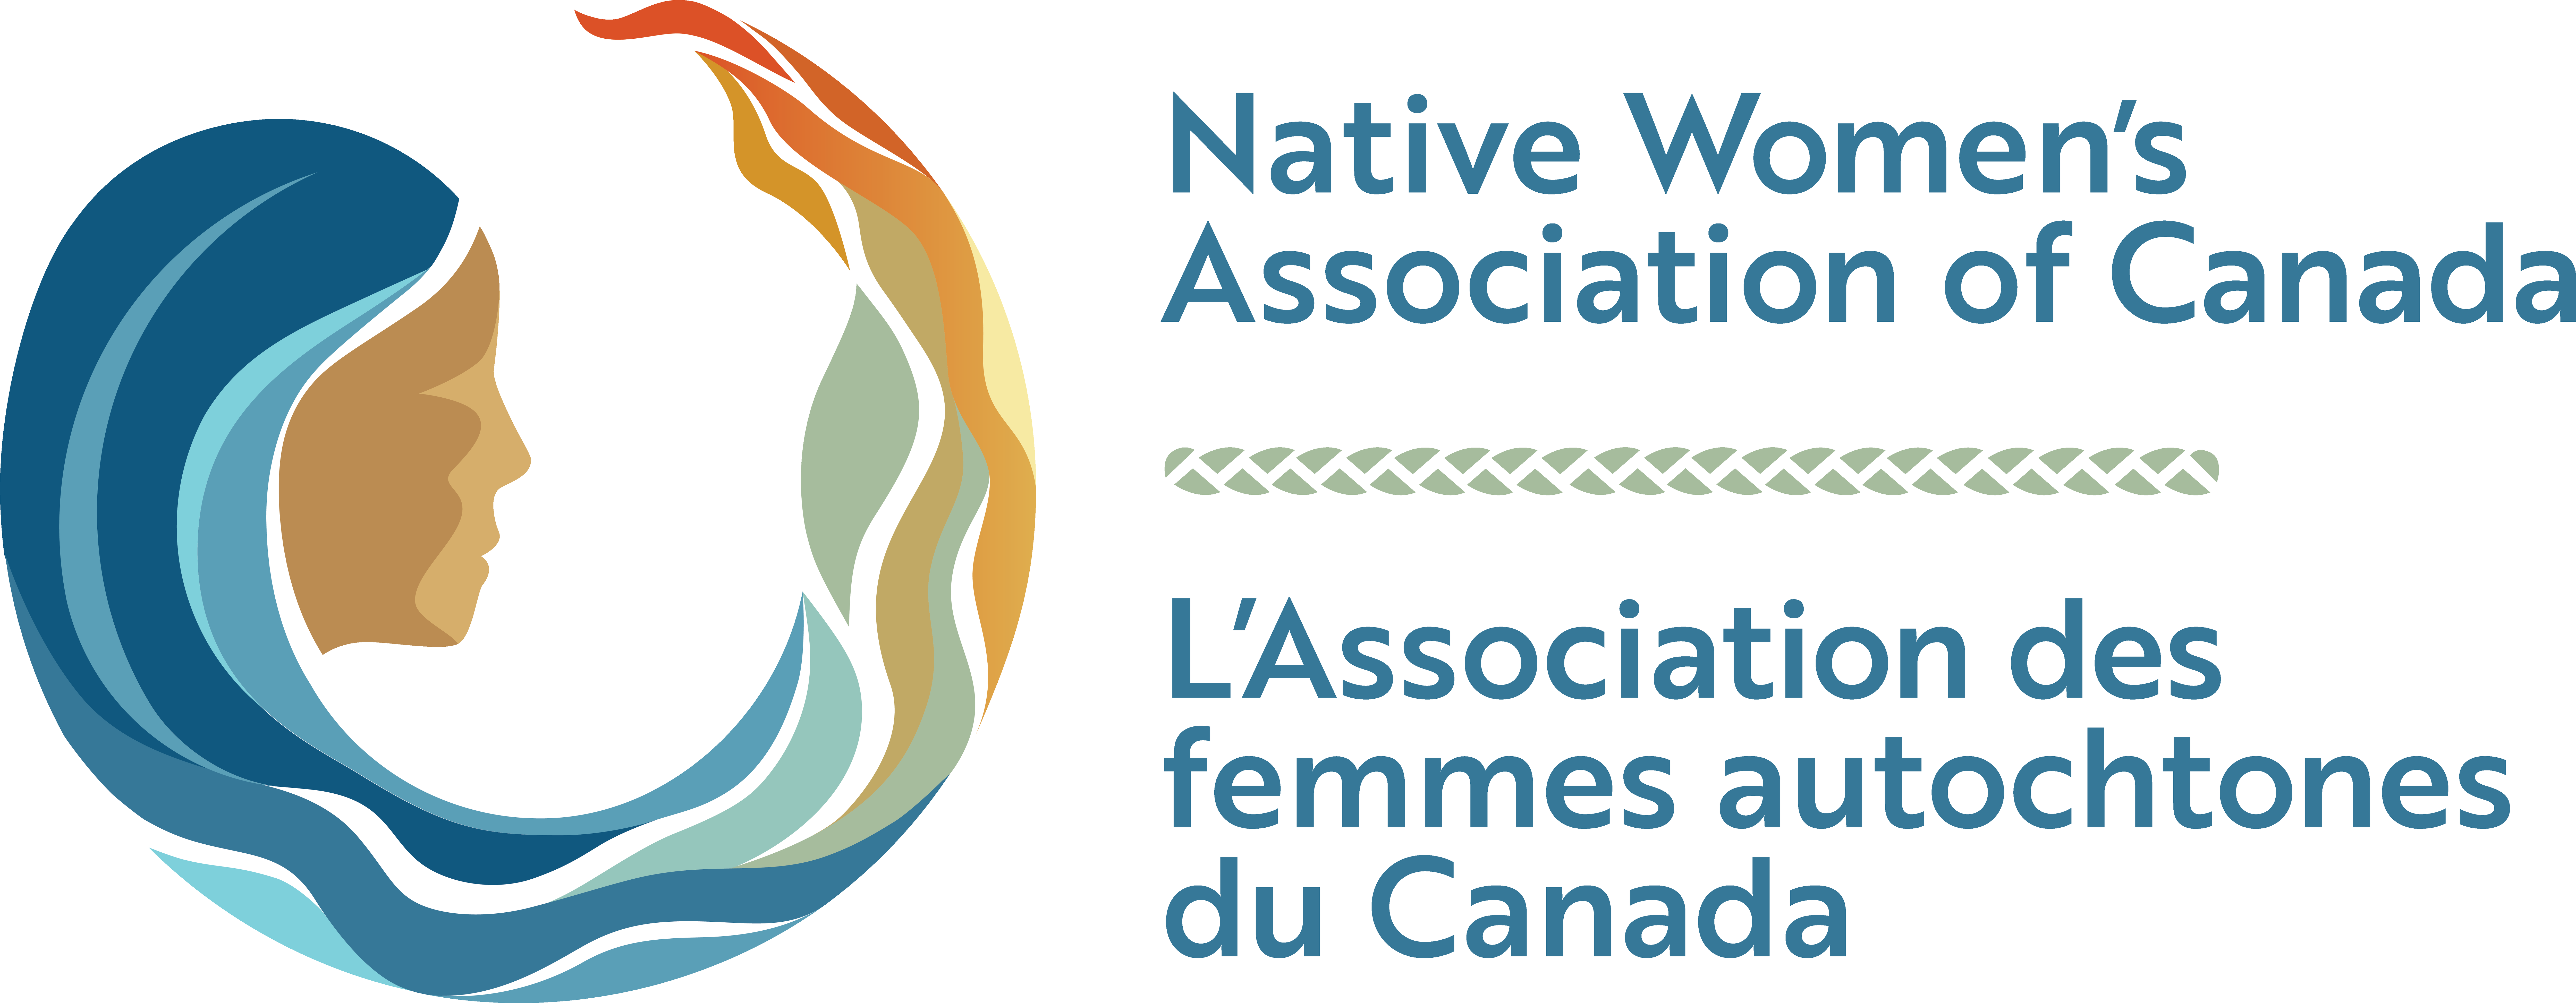 Native Women’s Association of Canada, Thursday, October 10, 2019, Press release picture